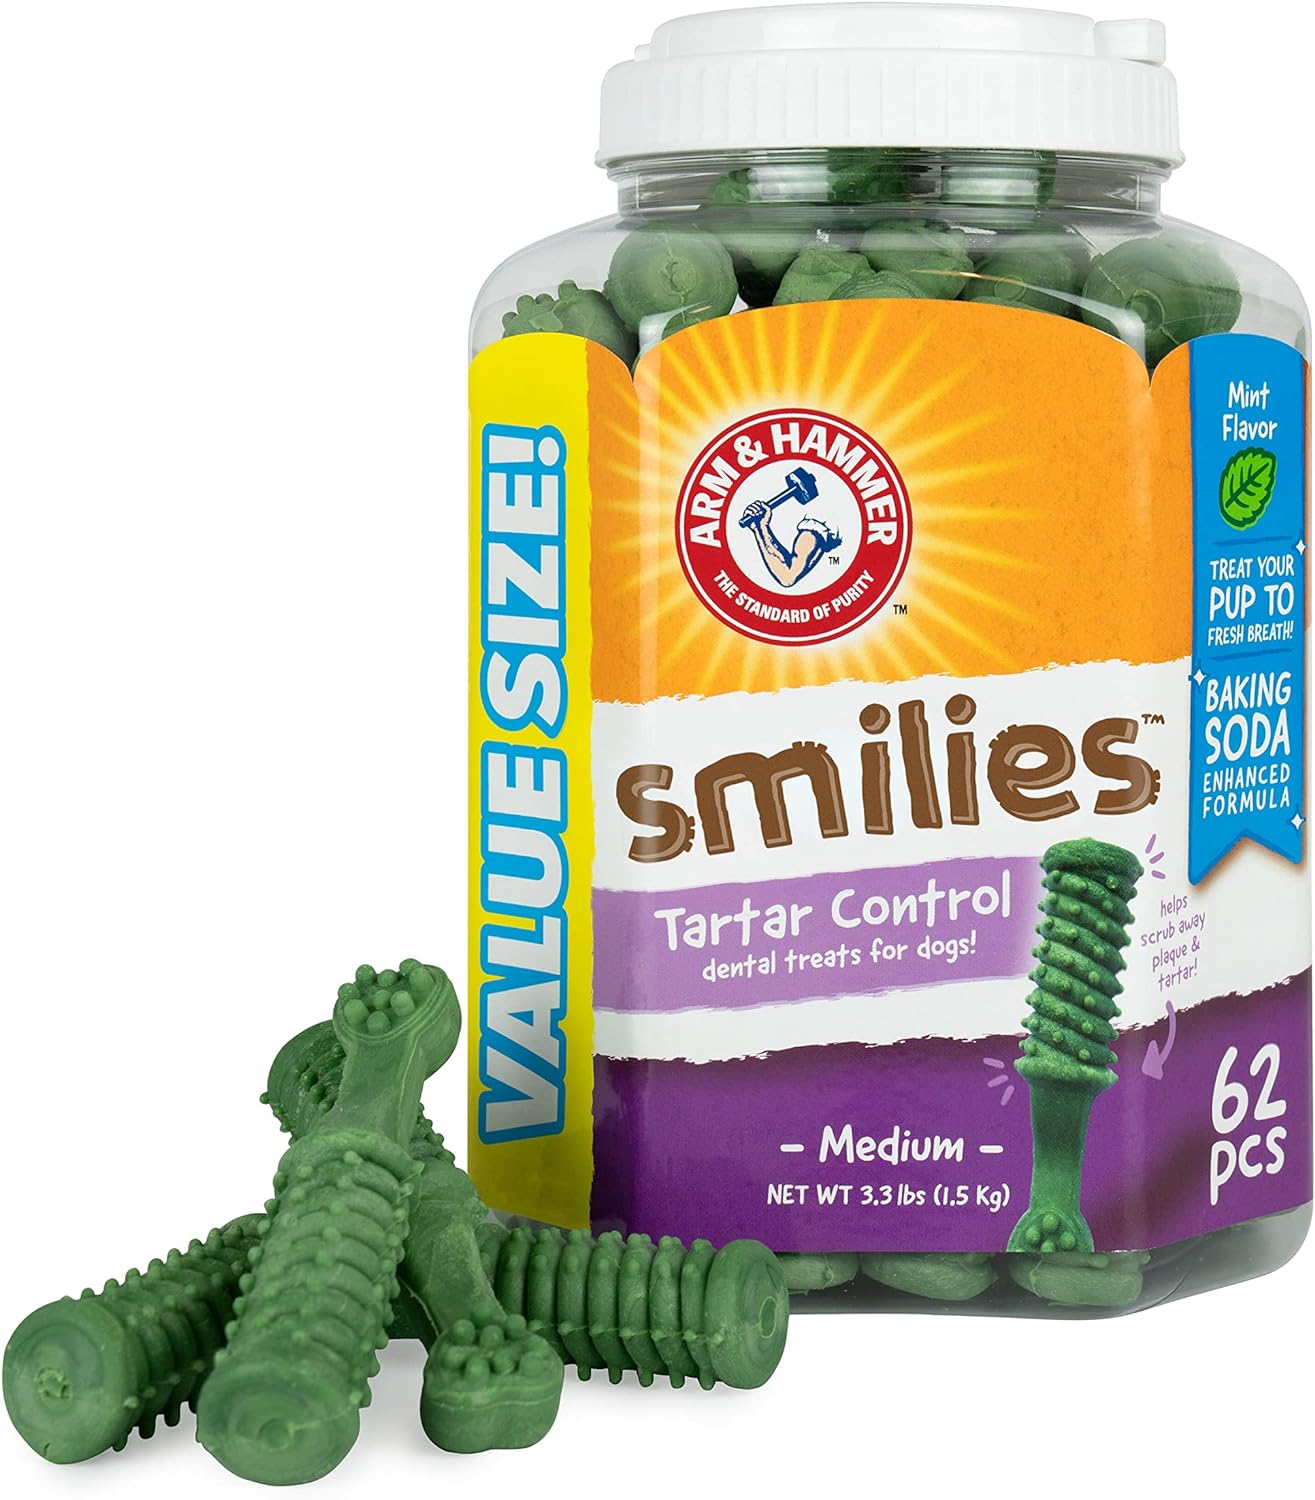 Arm & Hammer for Pets Smilies Tartar Control Dental Treats for Dogs, Value Pack, 62 Pieces | Dog Dental Chews Fight Bad Breath, Plaque & Tartar Without Brushing | Fresh Mint Flavor